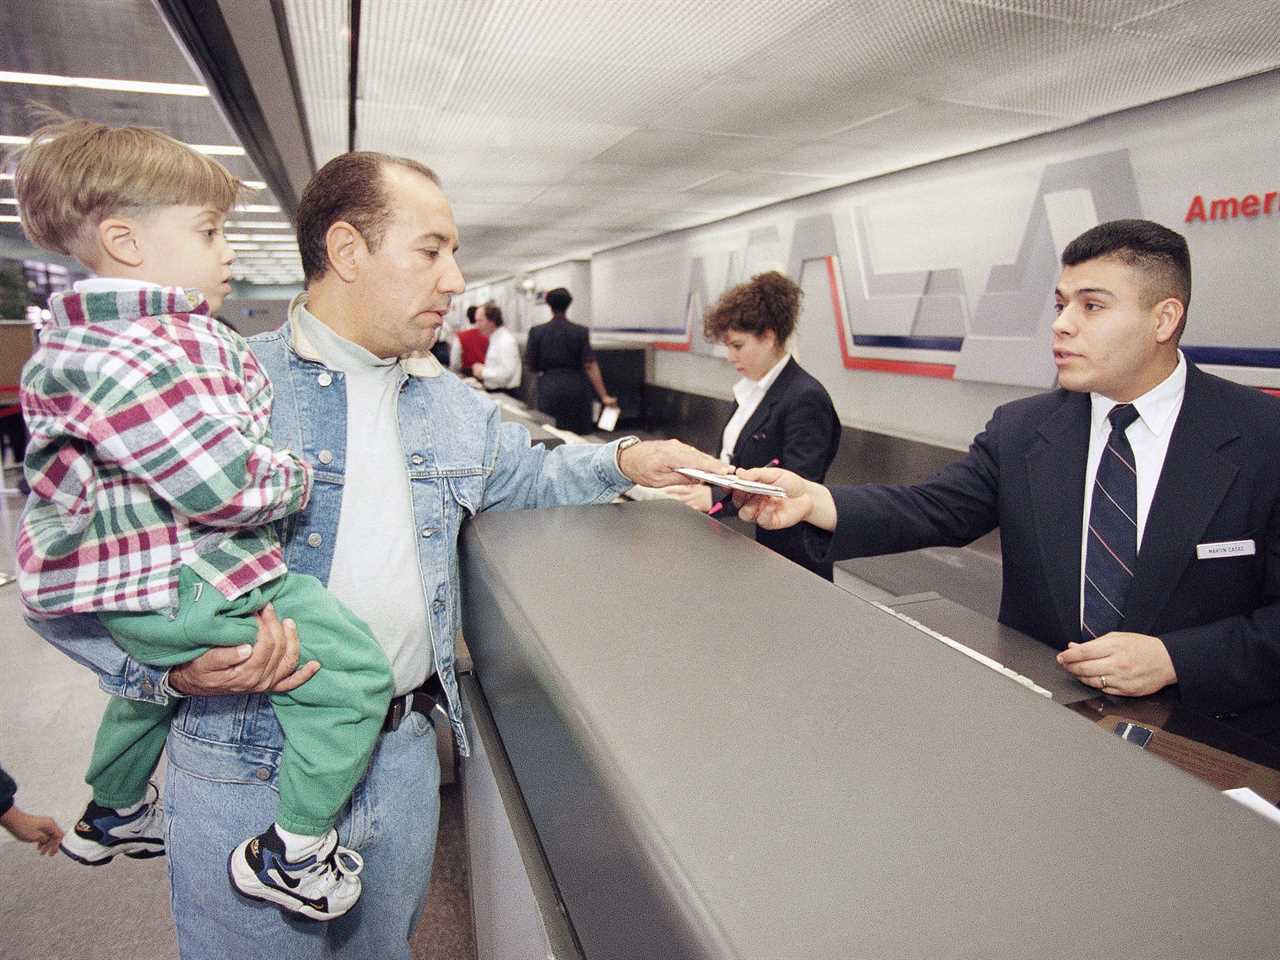 A passenger receives a boarding pass at Los Angeles International Airport in 1997.